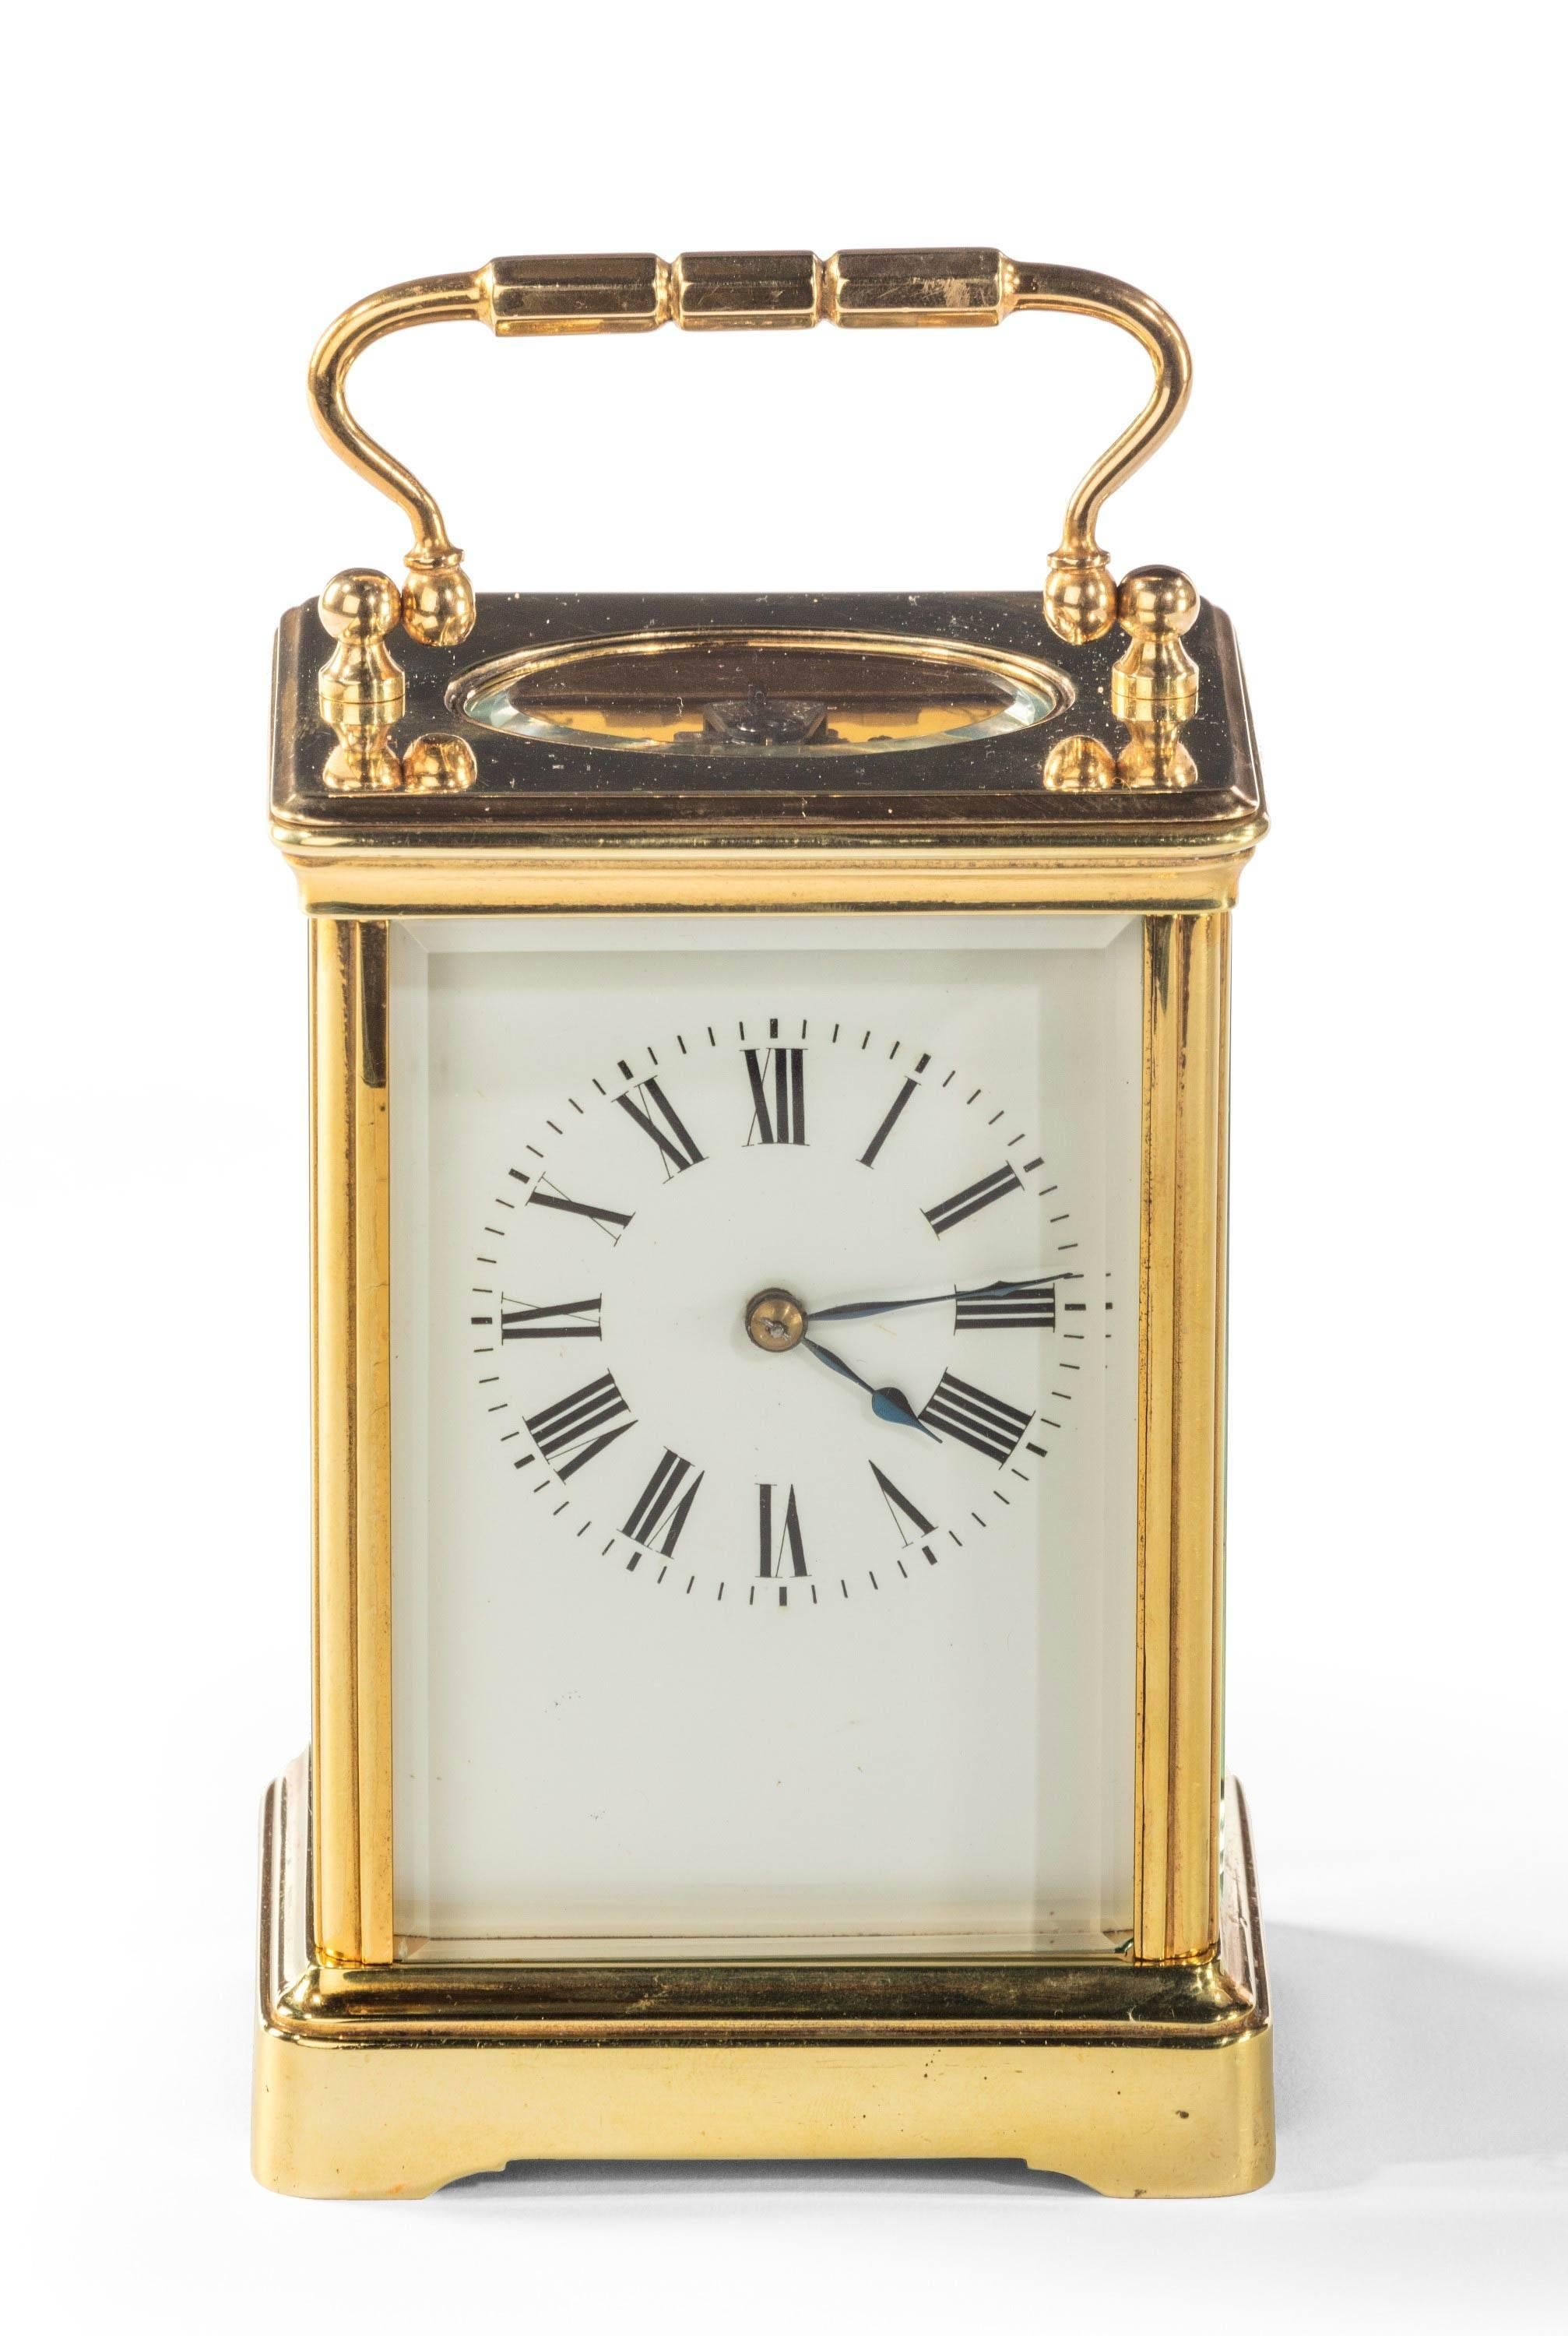 A brass carriage timepiece, unsigned, 20th century, the eight-day movement with silvered platform lever escapement with white enamel Roman numeral dial and spade hands, in a lacquered brass corniche case with bevel glazed panels, 5 ins high